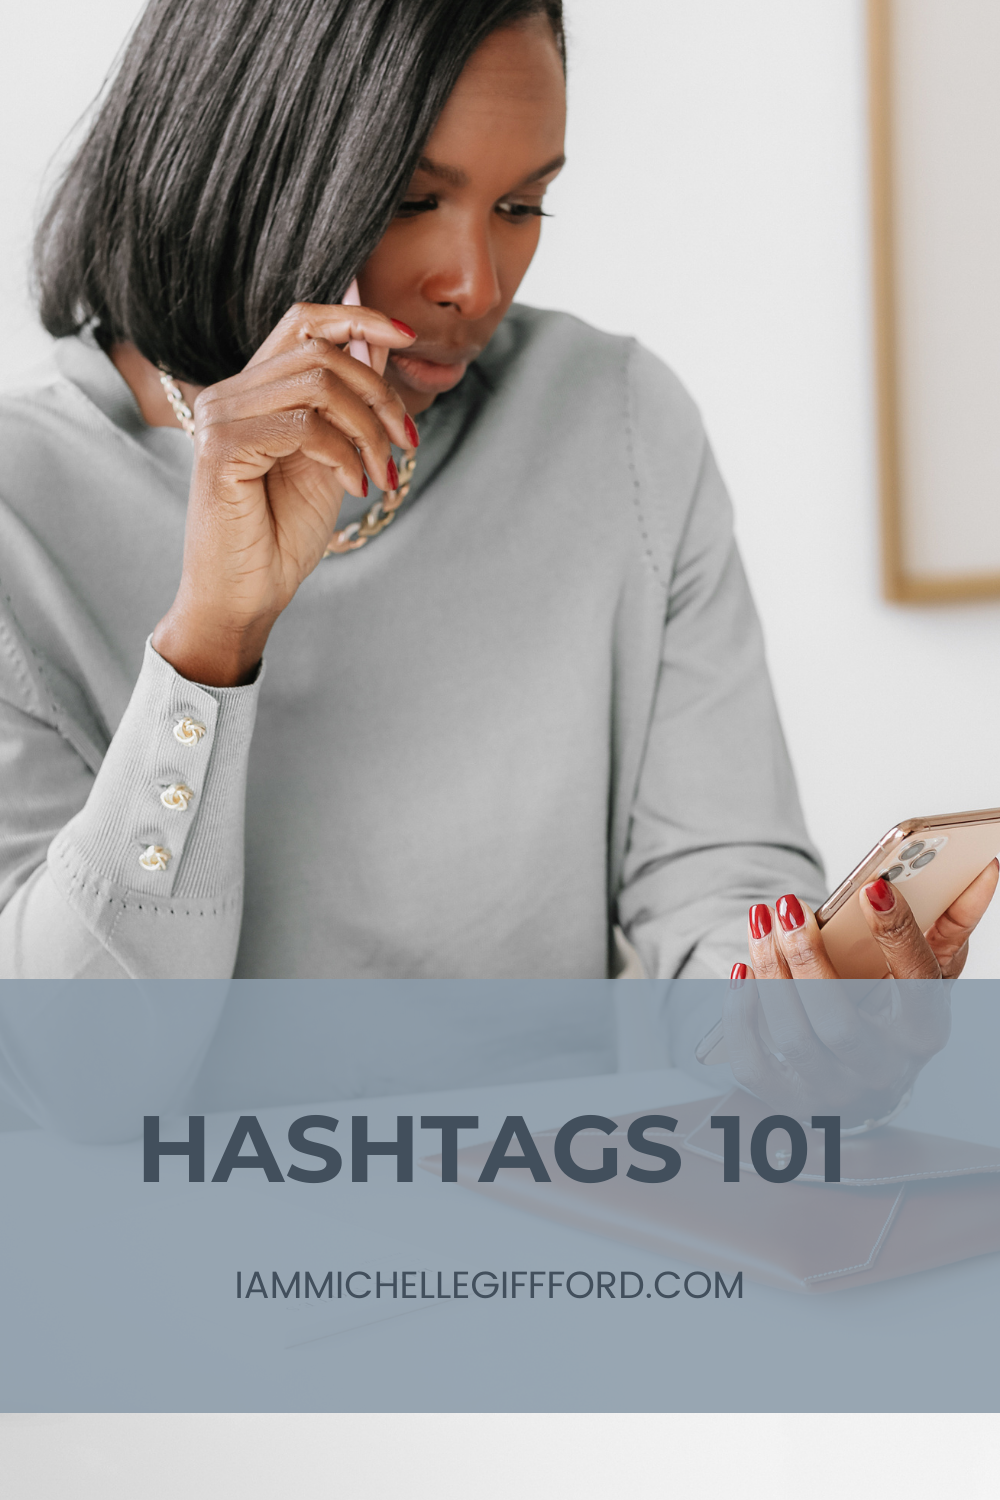 How to use hashtags to grow your business. iammichellegifford.com